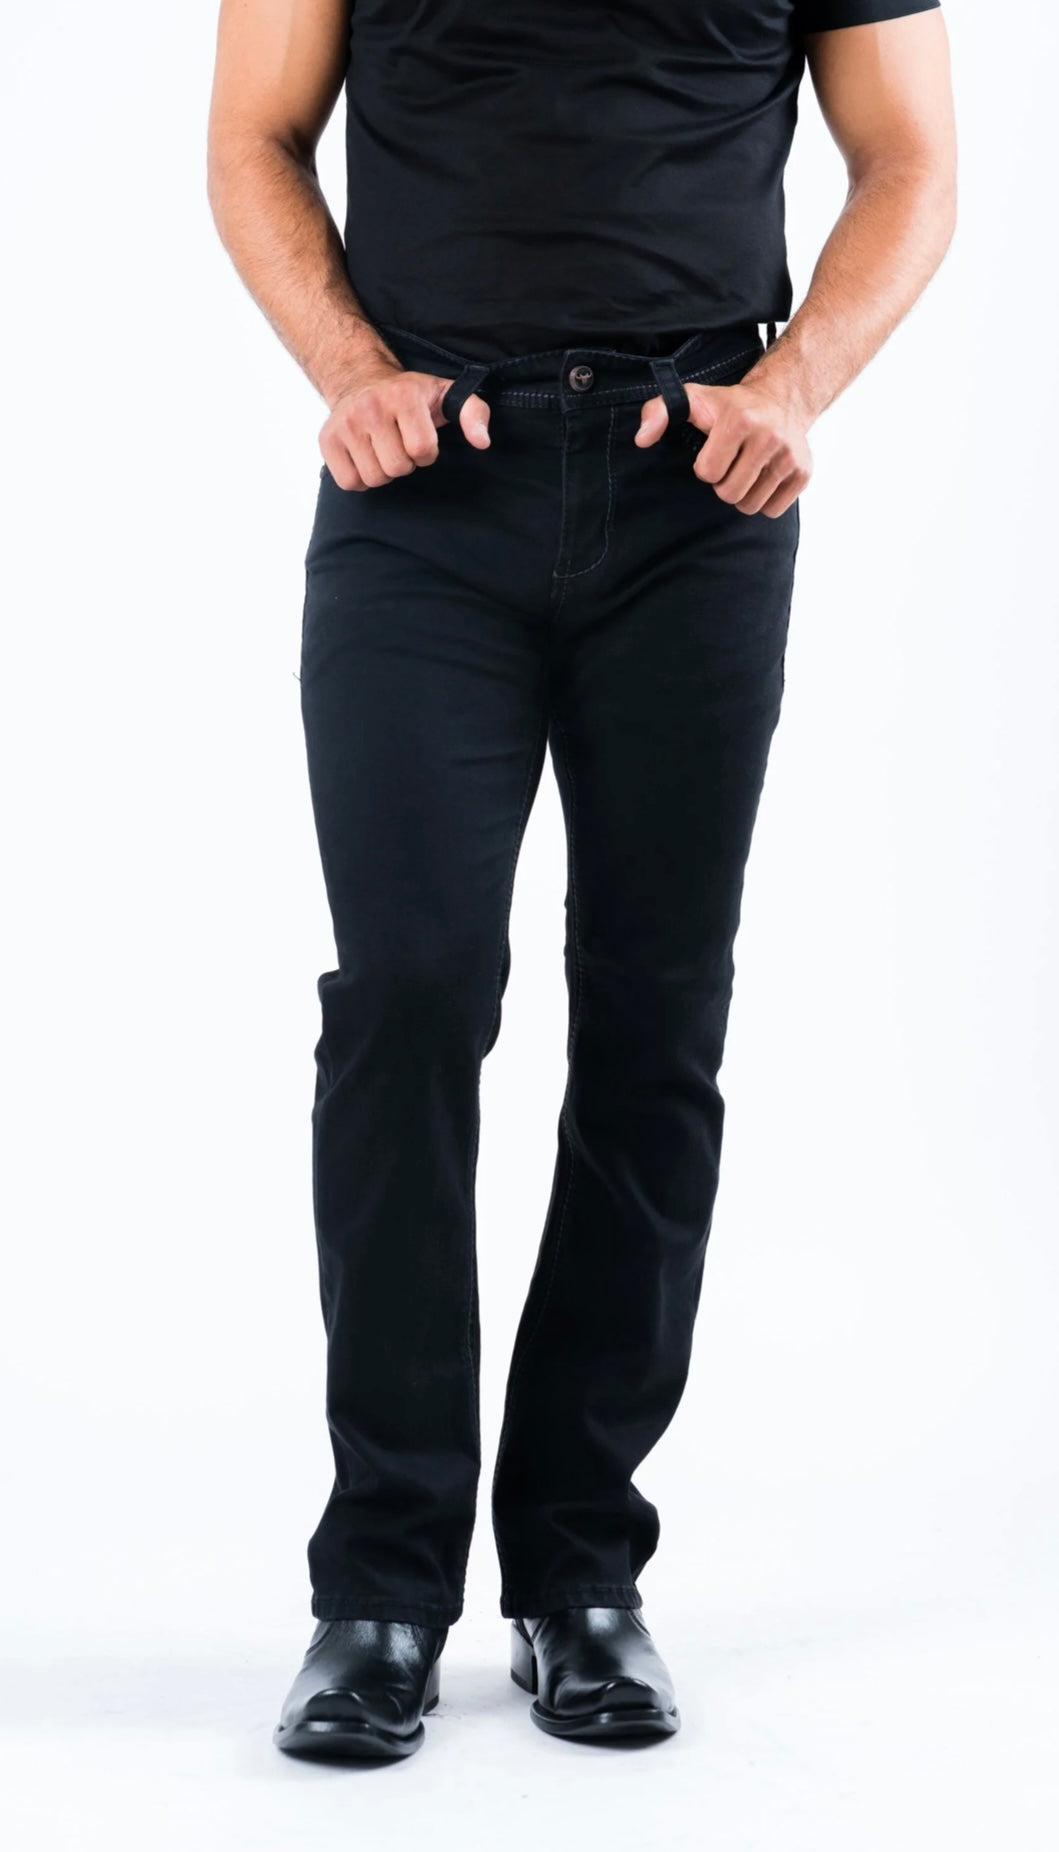 Jeans for Tall Men | Men's Tall Jeans | American Tall